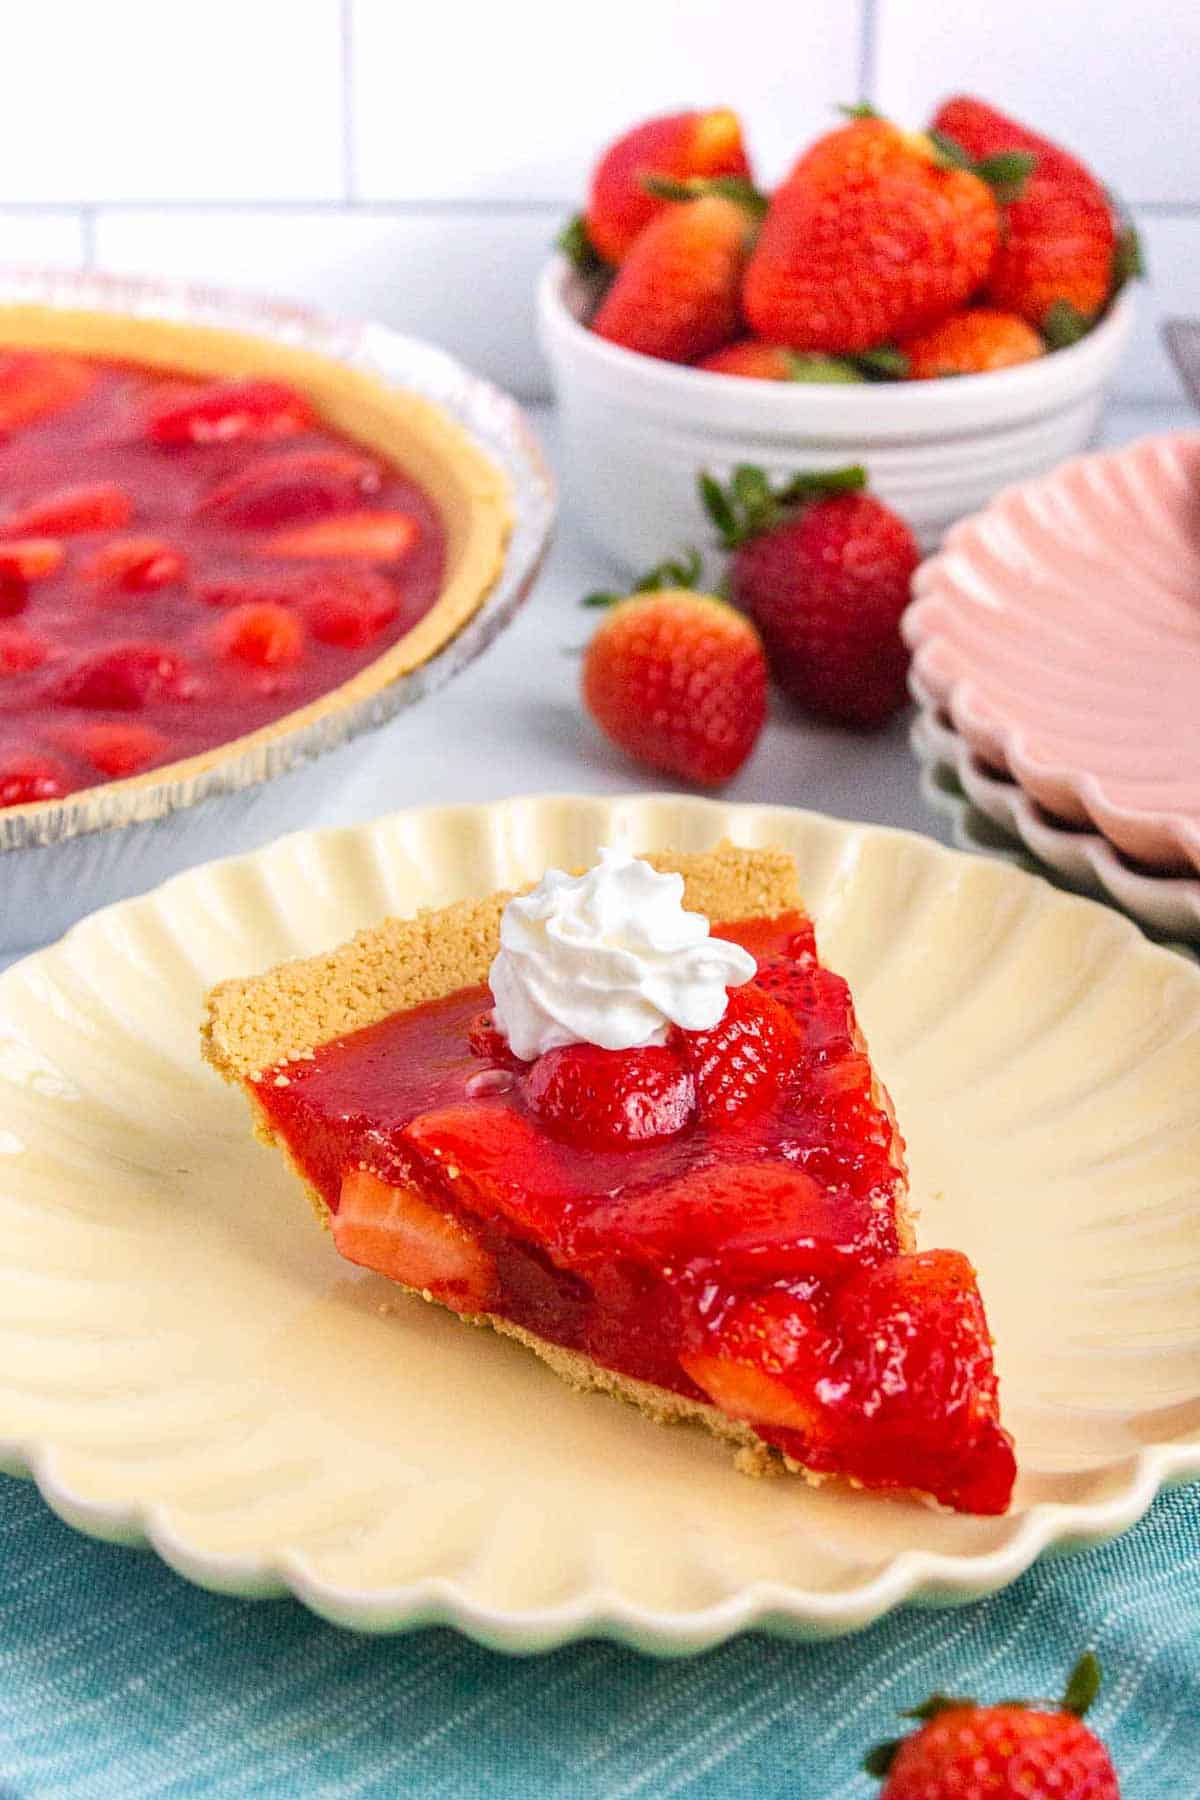 Slice of strawberry jello pie on a small plated topped with a dollop of whipped cream.